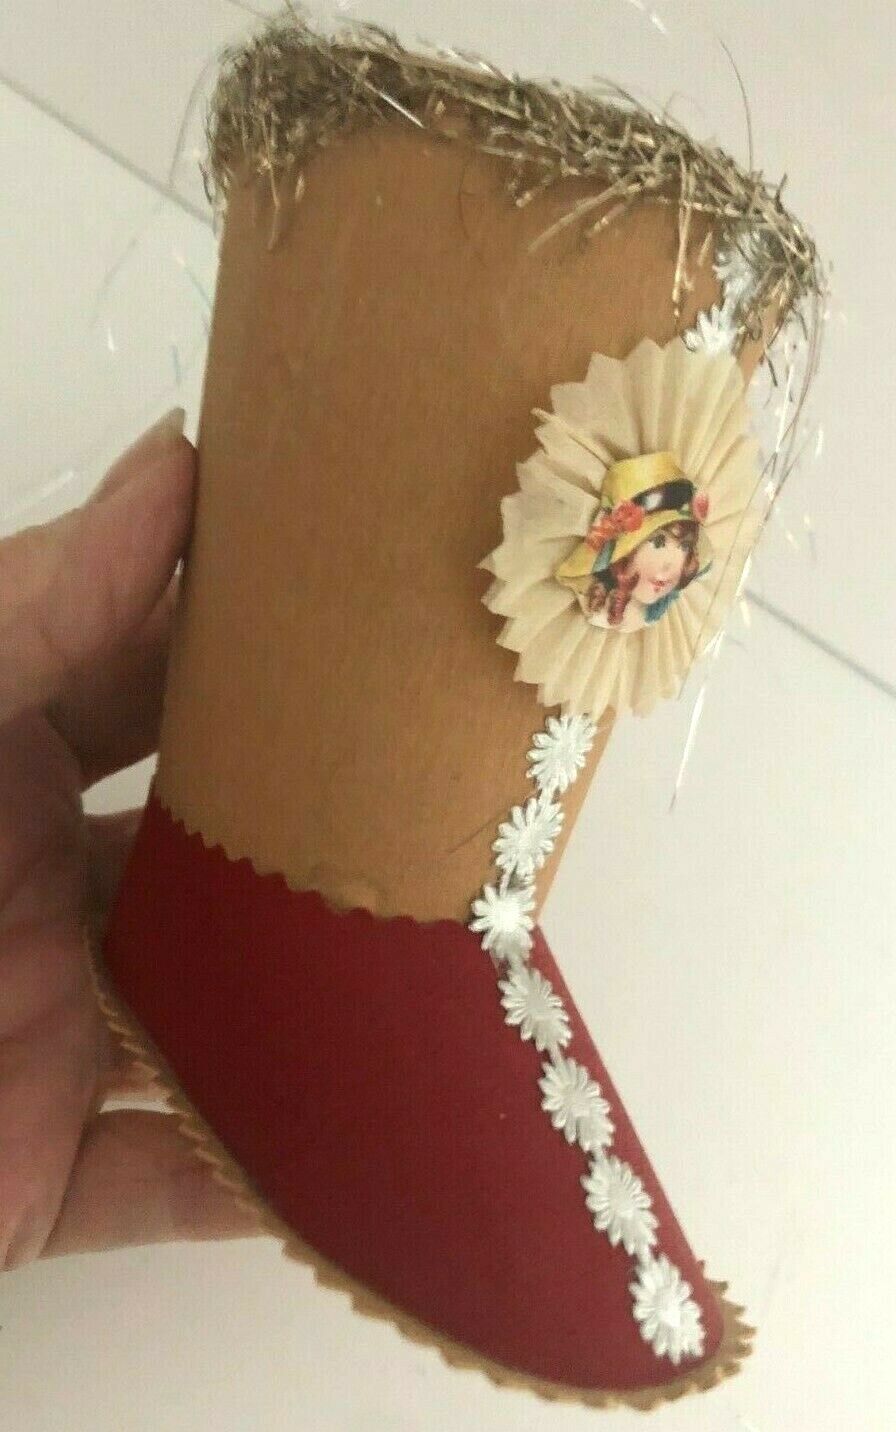 Vtg Early WENDY ADDISON Theatre of Dream PAPER ART TINSEL BOOT Ornament Shoe 1